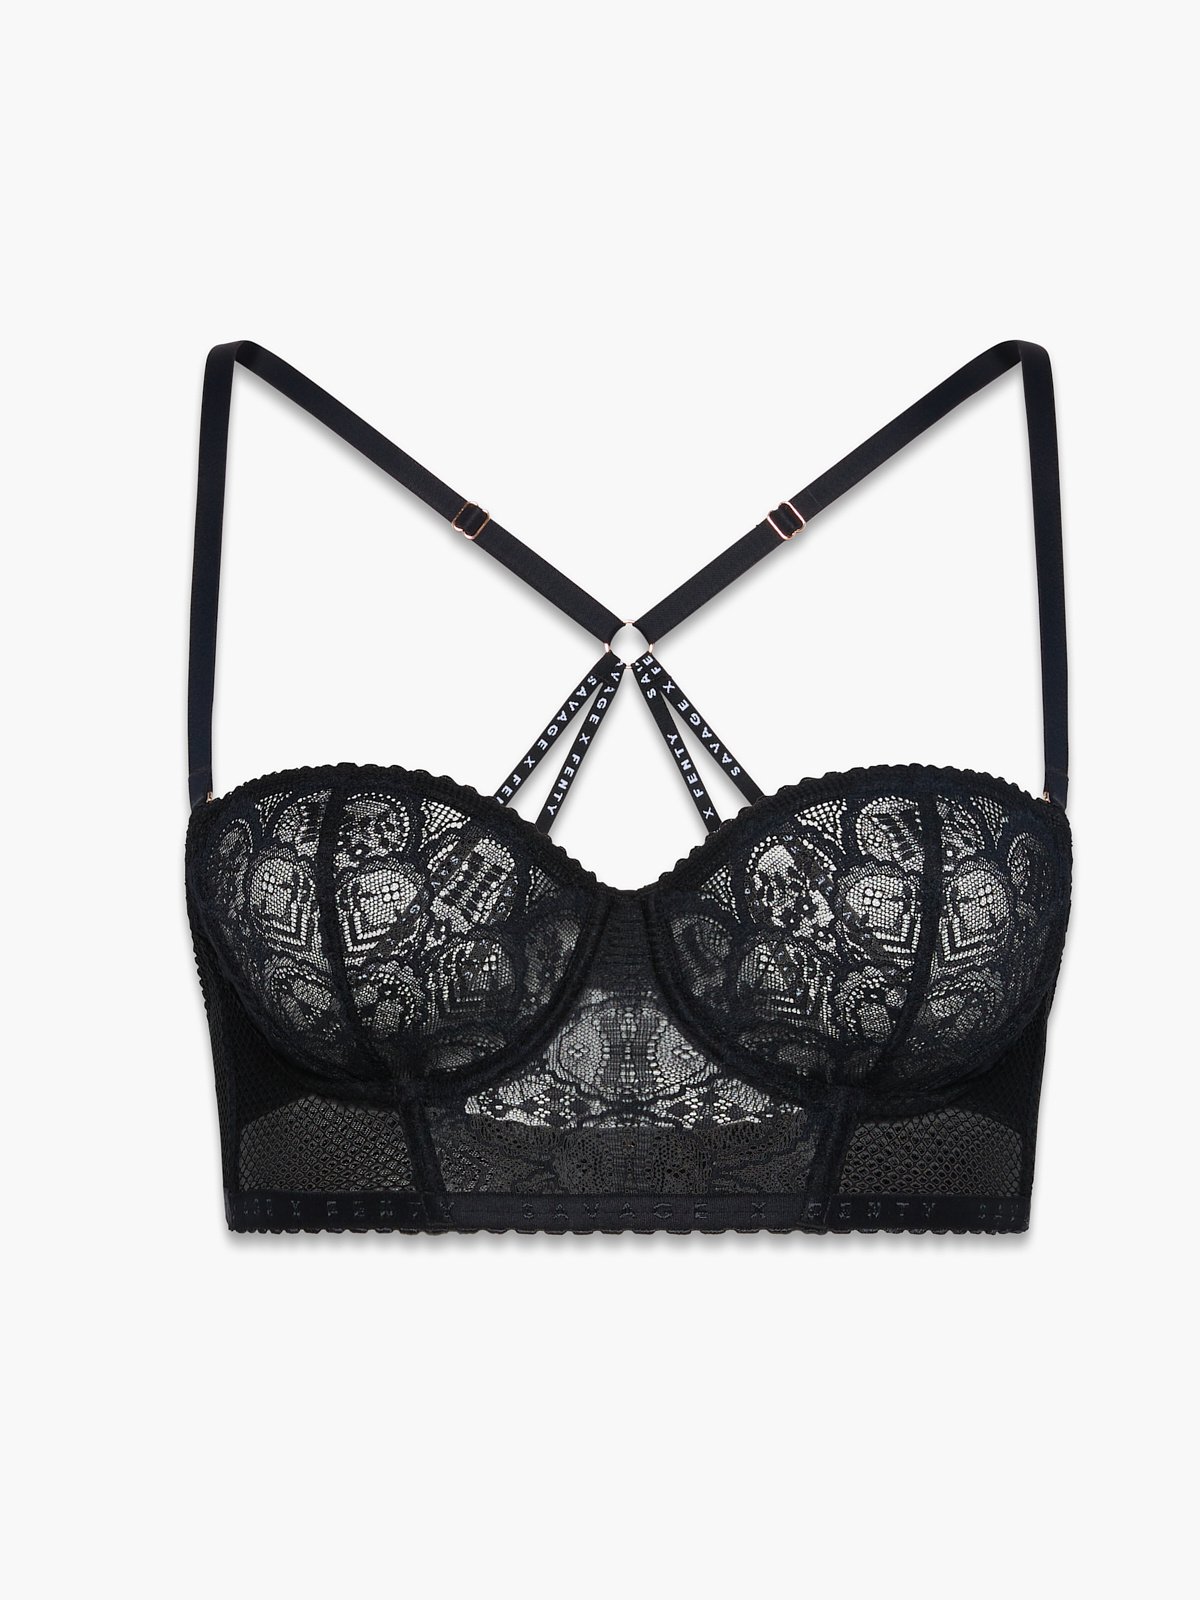 X-Rated Lace Bustier in Black